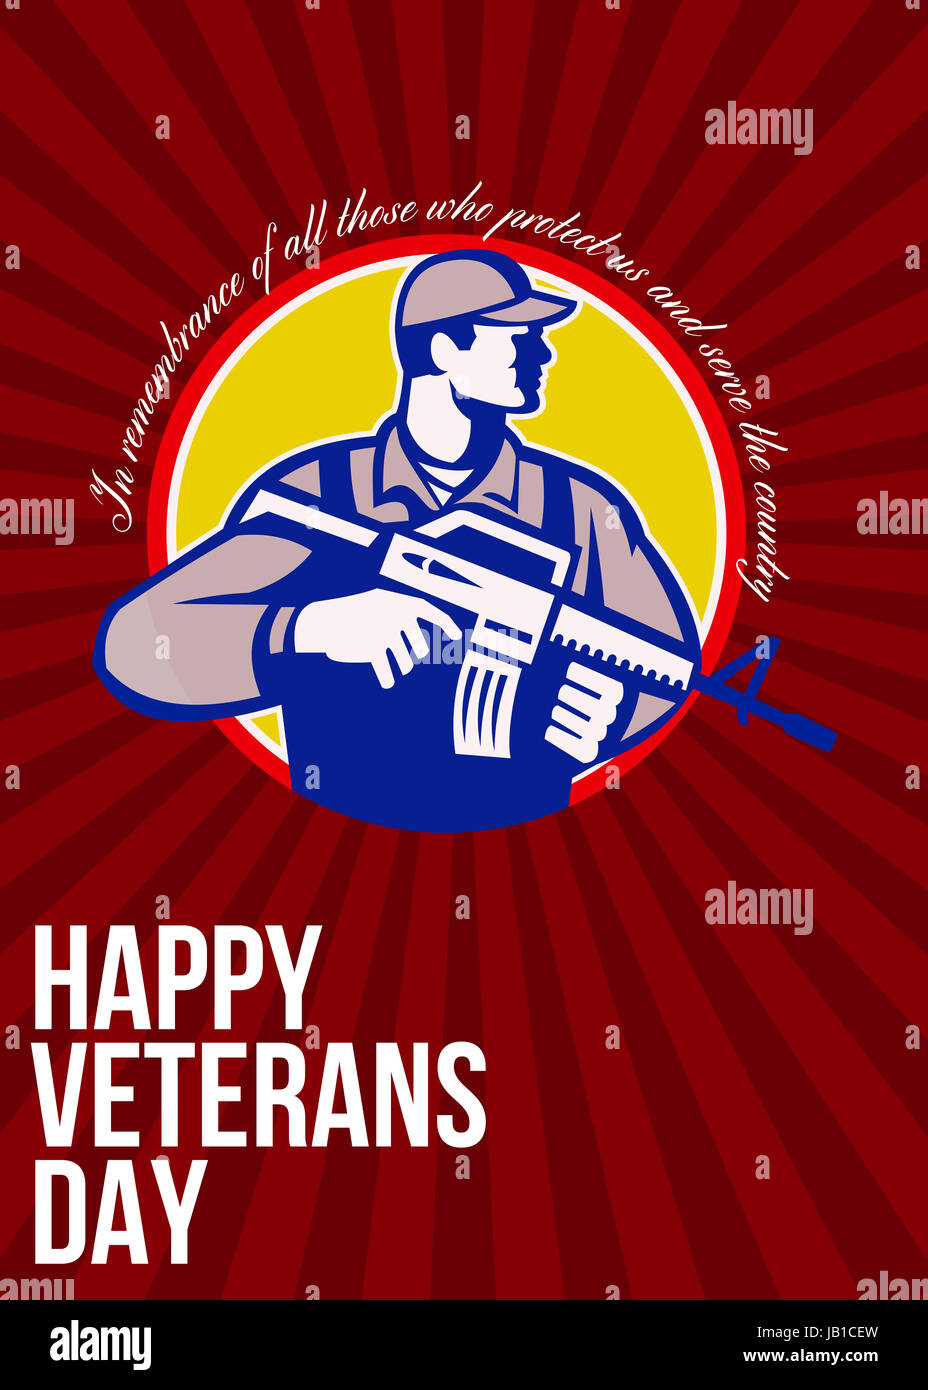 Greeting card poster showing illustration of an American soldier serviceman with assault rifle looking to side set inside circle with words Happy Veterans day. Stock Photo